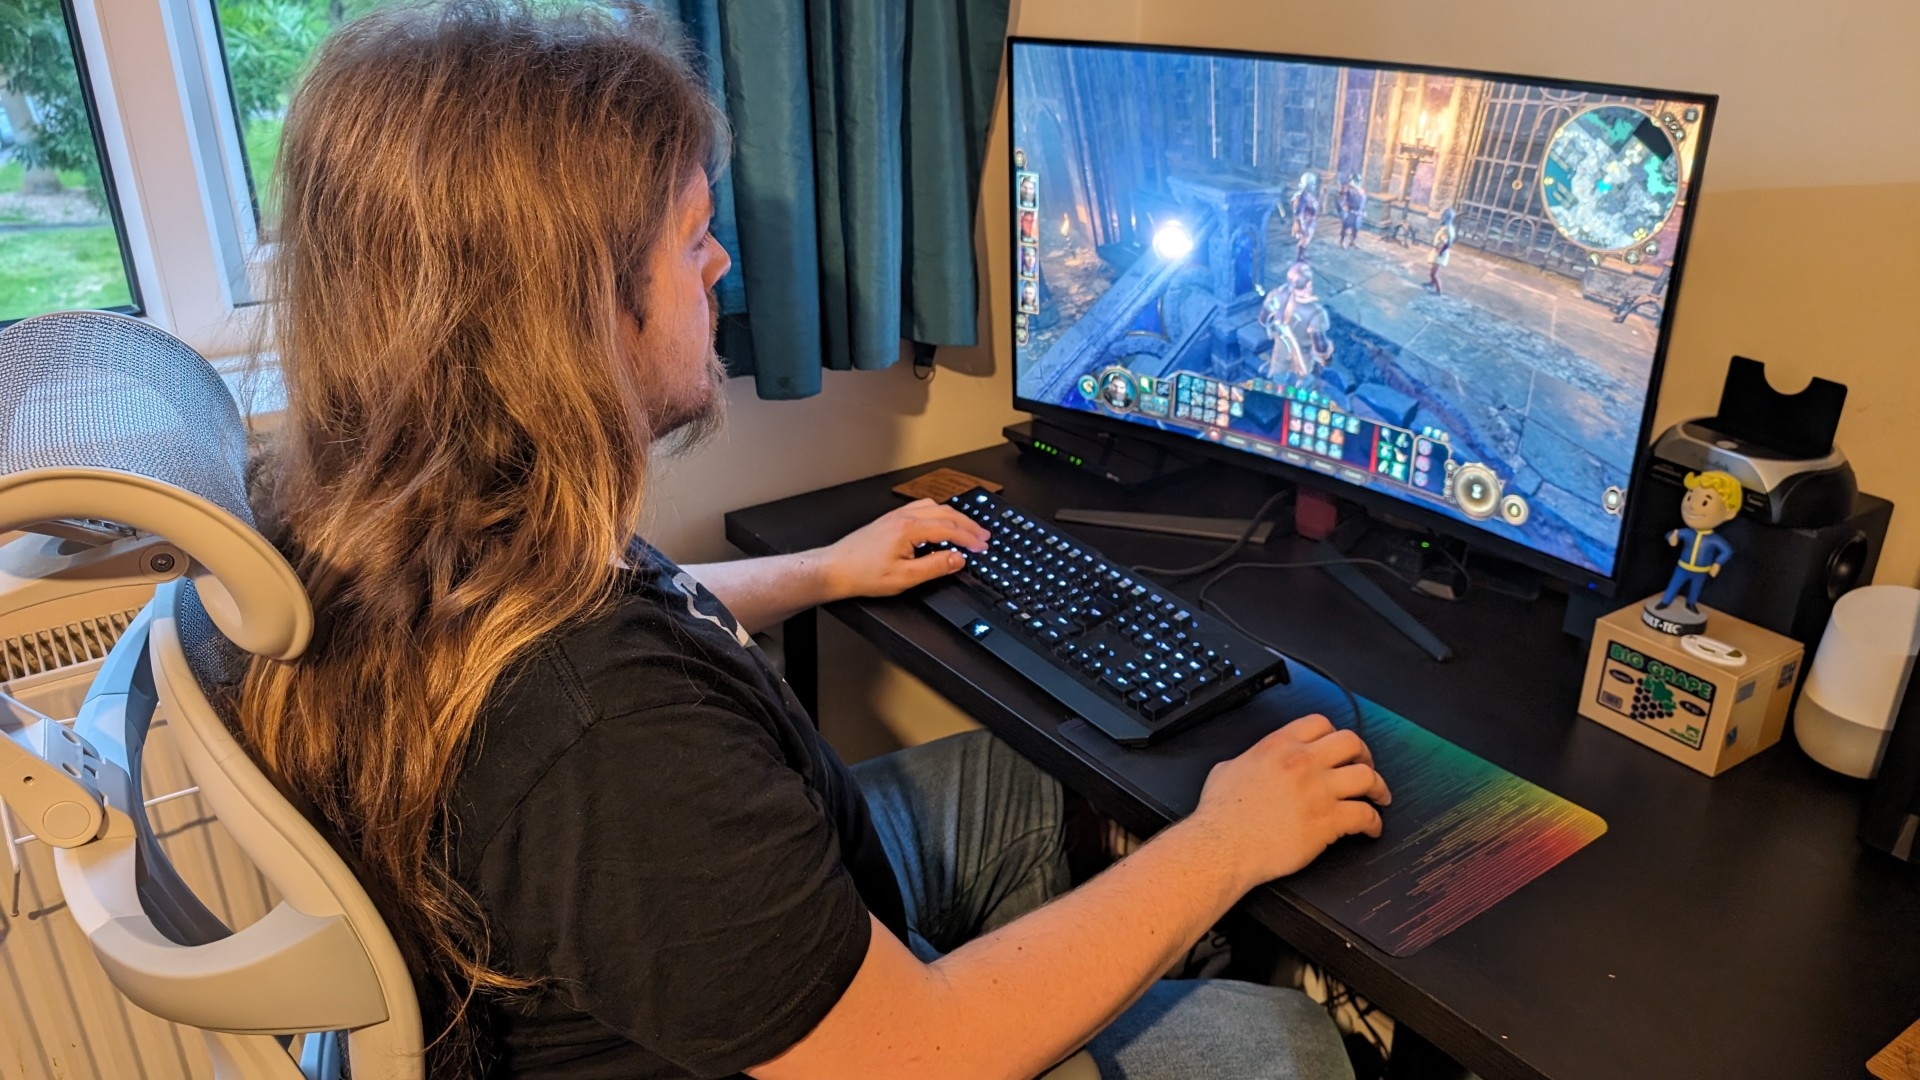 Sihoo Doro C300 chair review image showing a beautiful long-haired man in the prime of life playing Baldur's Gate 3 while sitting in the chair.